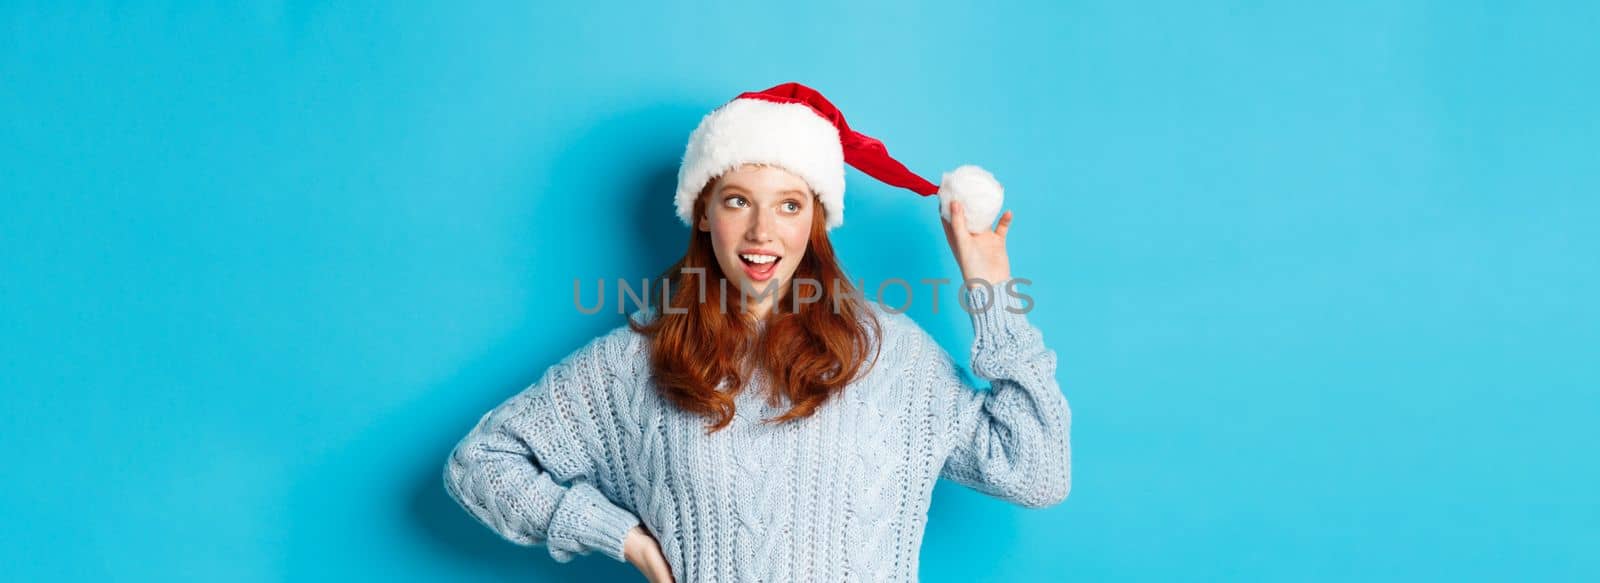 Winter holidays and Christmas Eve concept. Silly redhead girl with freckles, touching her santa hat and thinking, planning New Year celebration, standing over blue background.